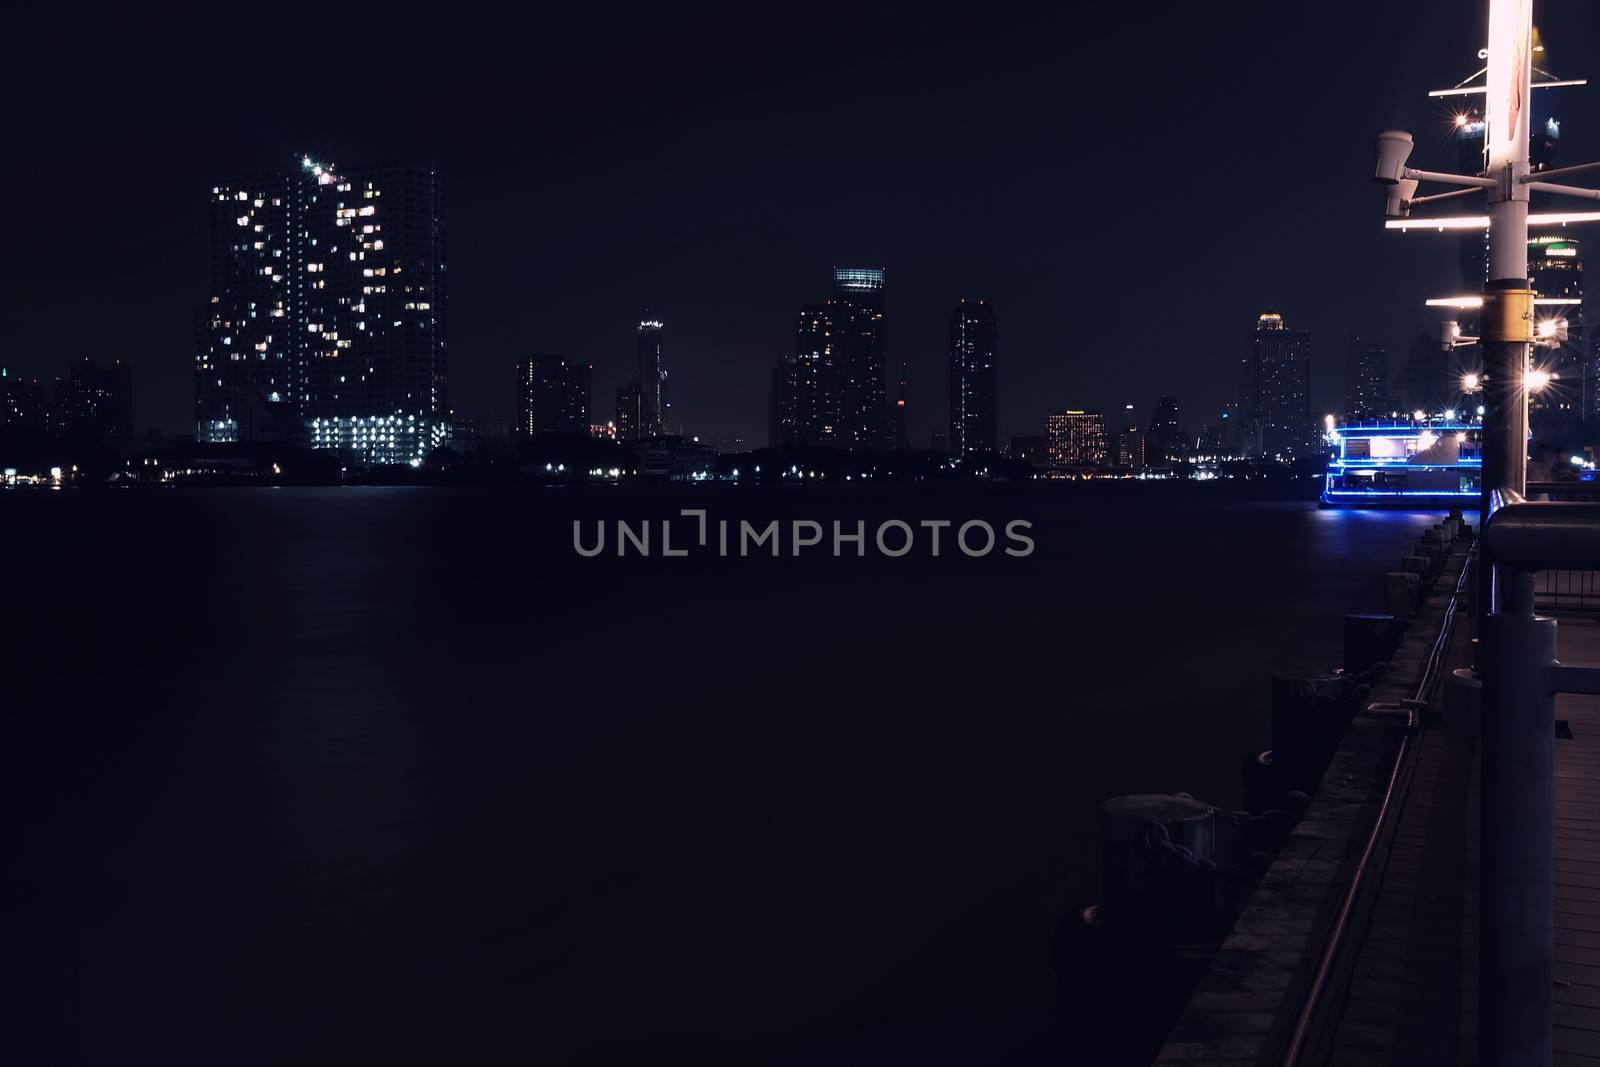 Scenery of NIght at Chaophraya River at Asiatique Market Pier. Chaophraya River is the major river in Bangkok, Thailand.